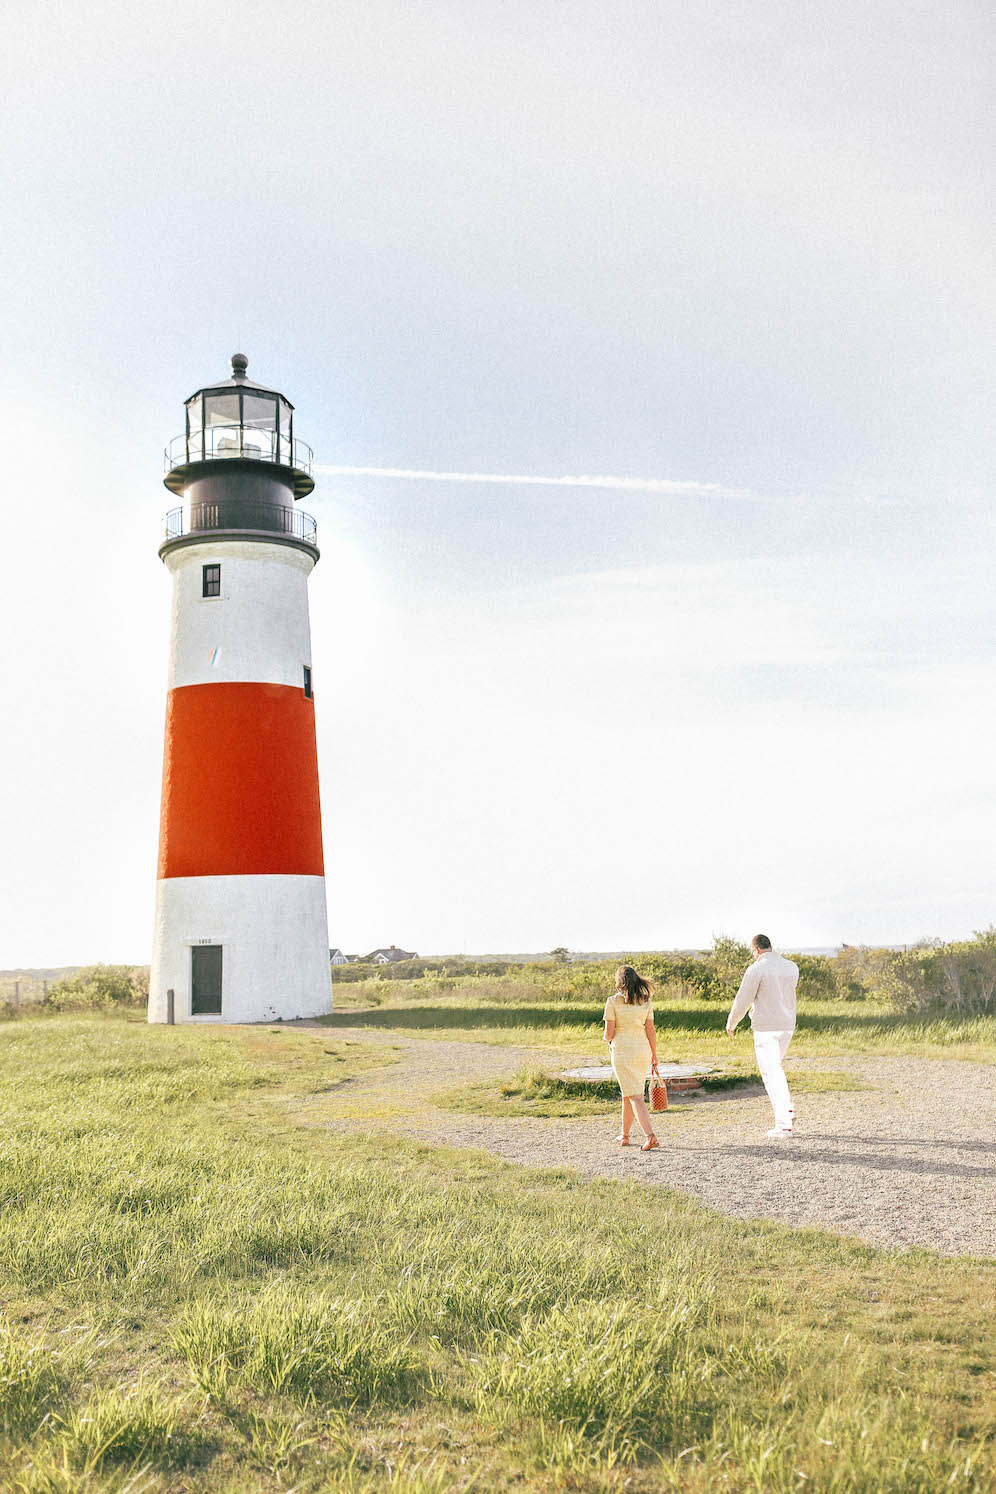 Romantic Places To Visit In New England The Coastal Confidence by Aubrey Yandow